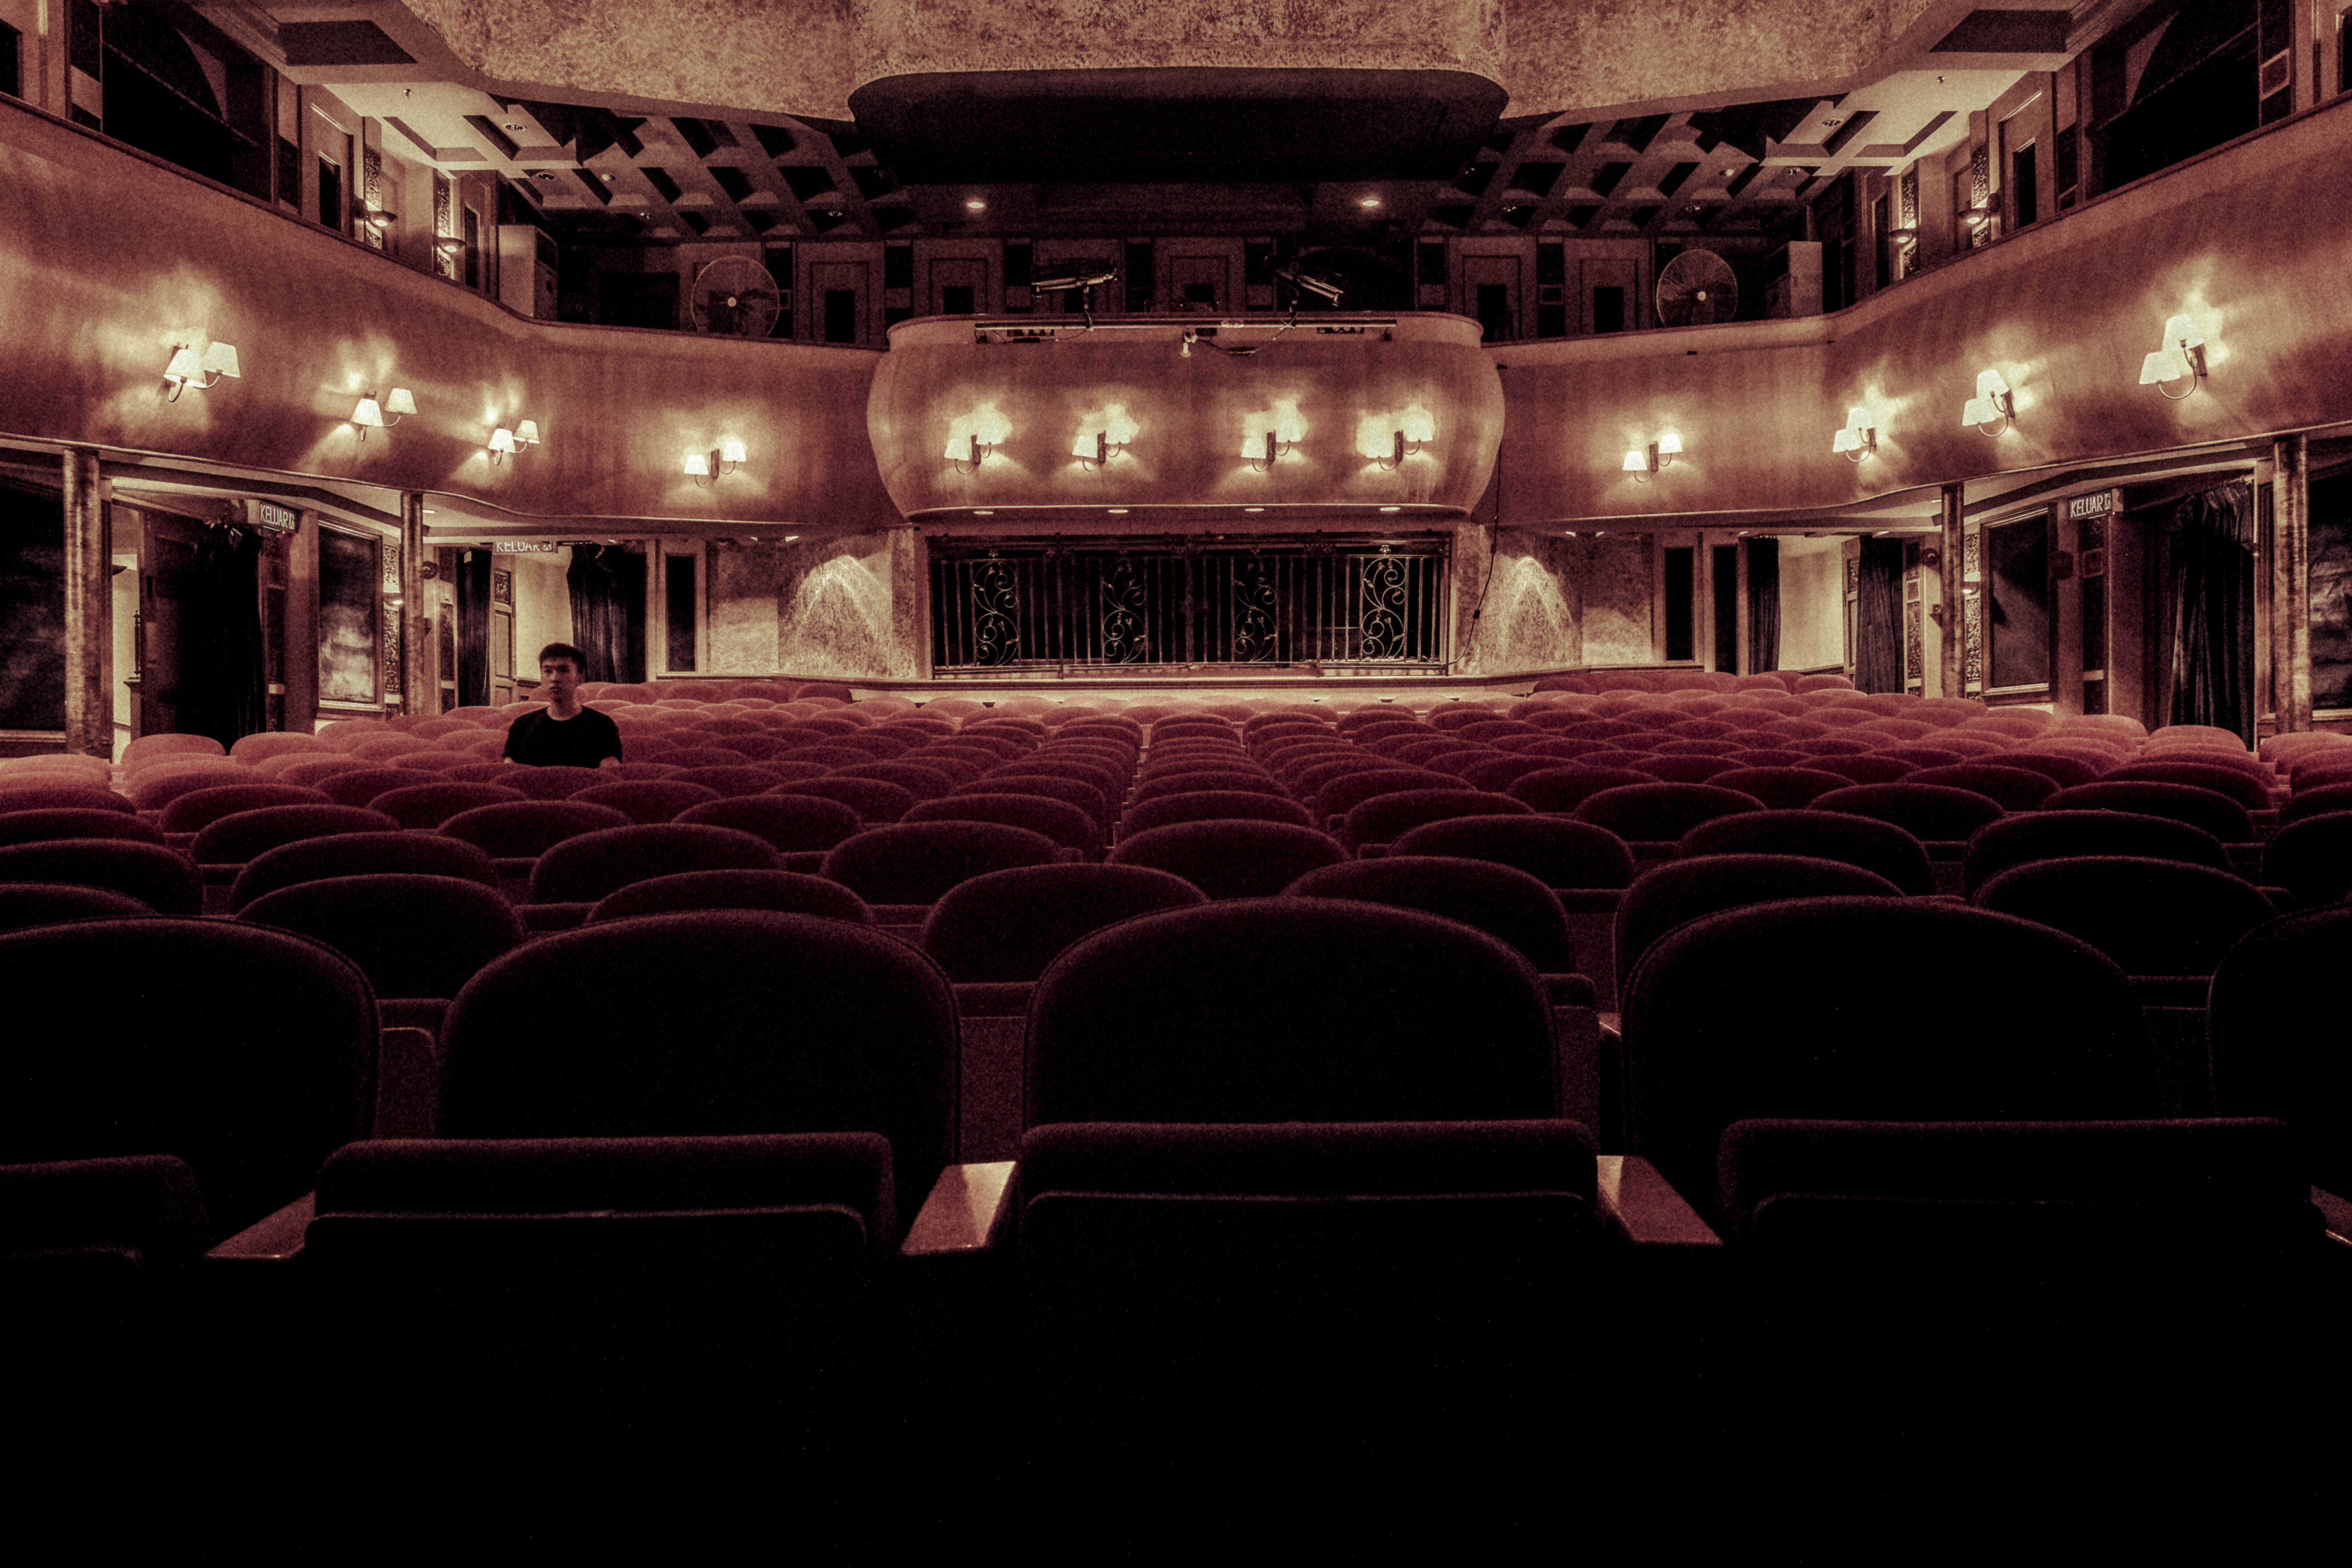 Are you ready for this post about the theaters? This is post about philosophy and you might not get it immediatly. Are you up for the challenge?